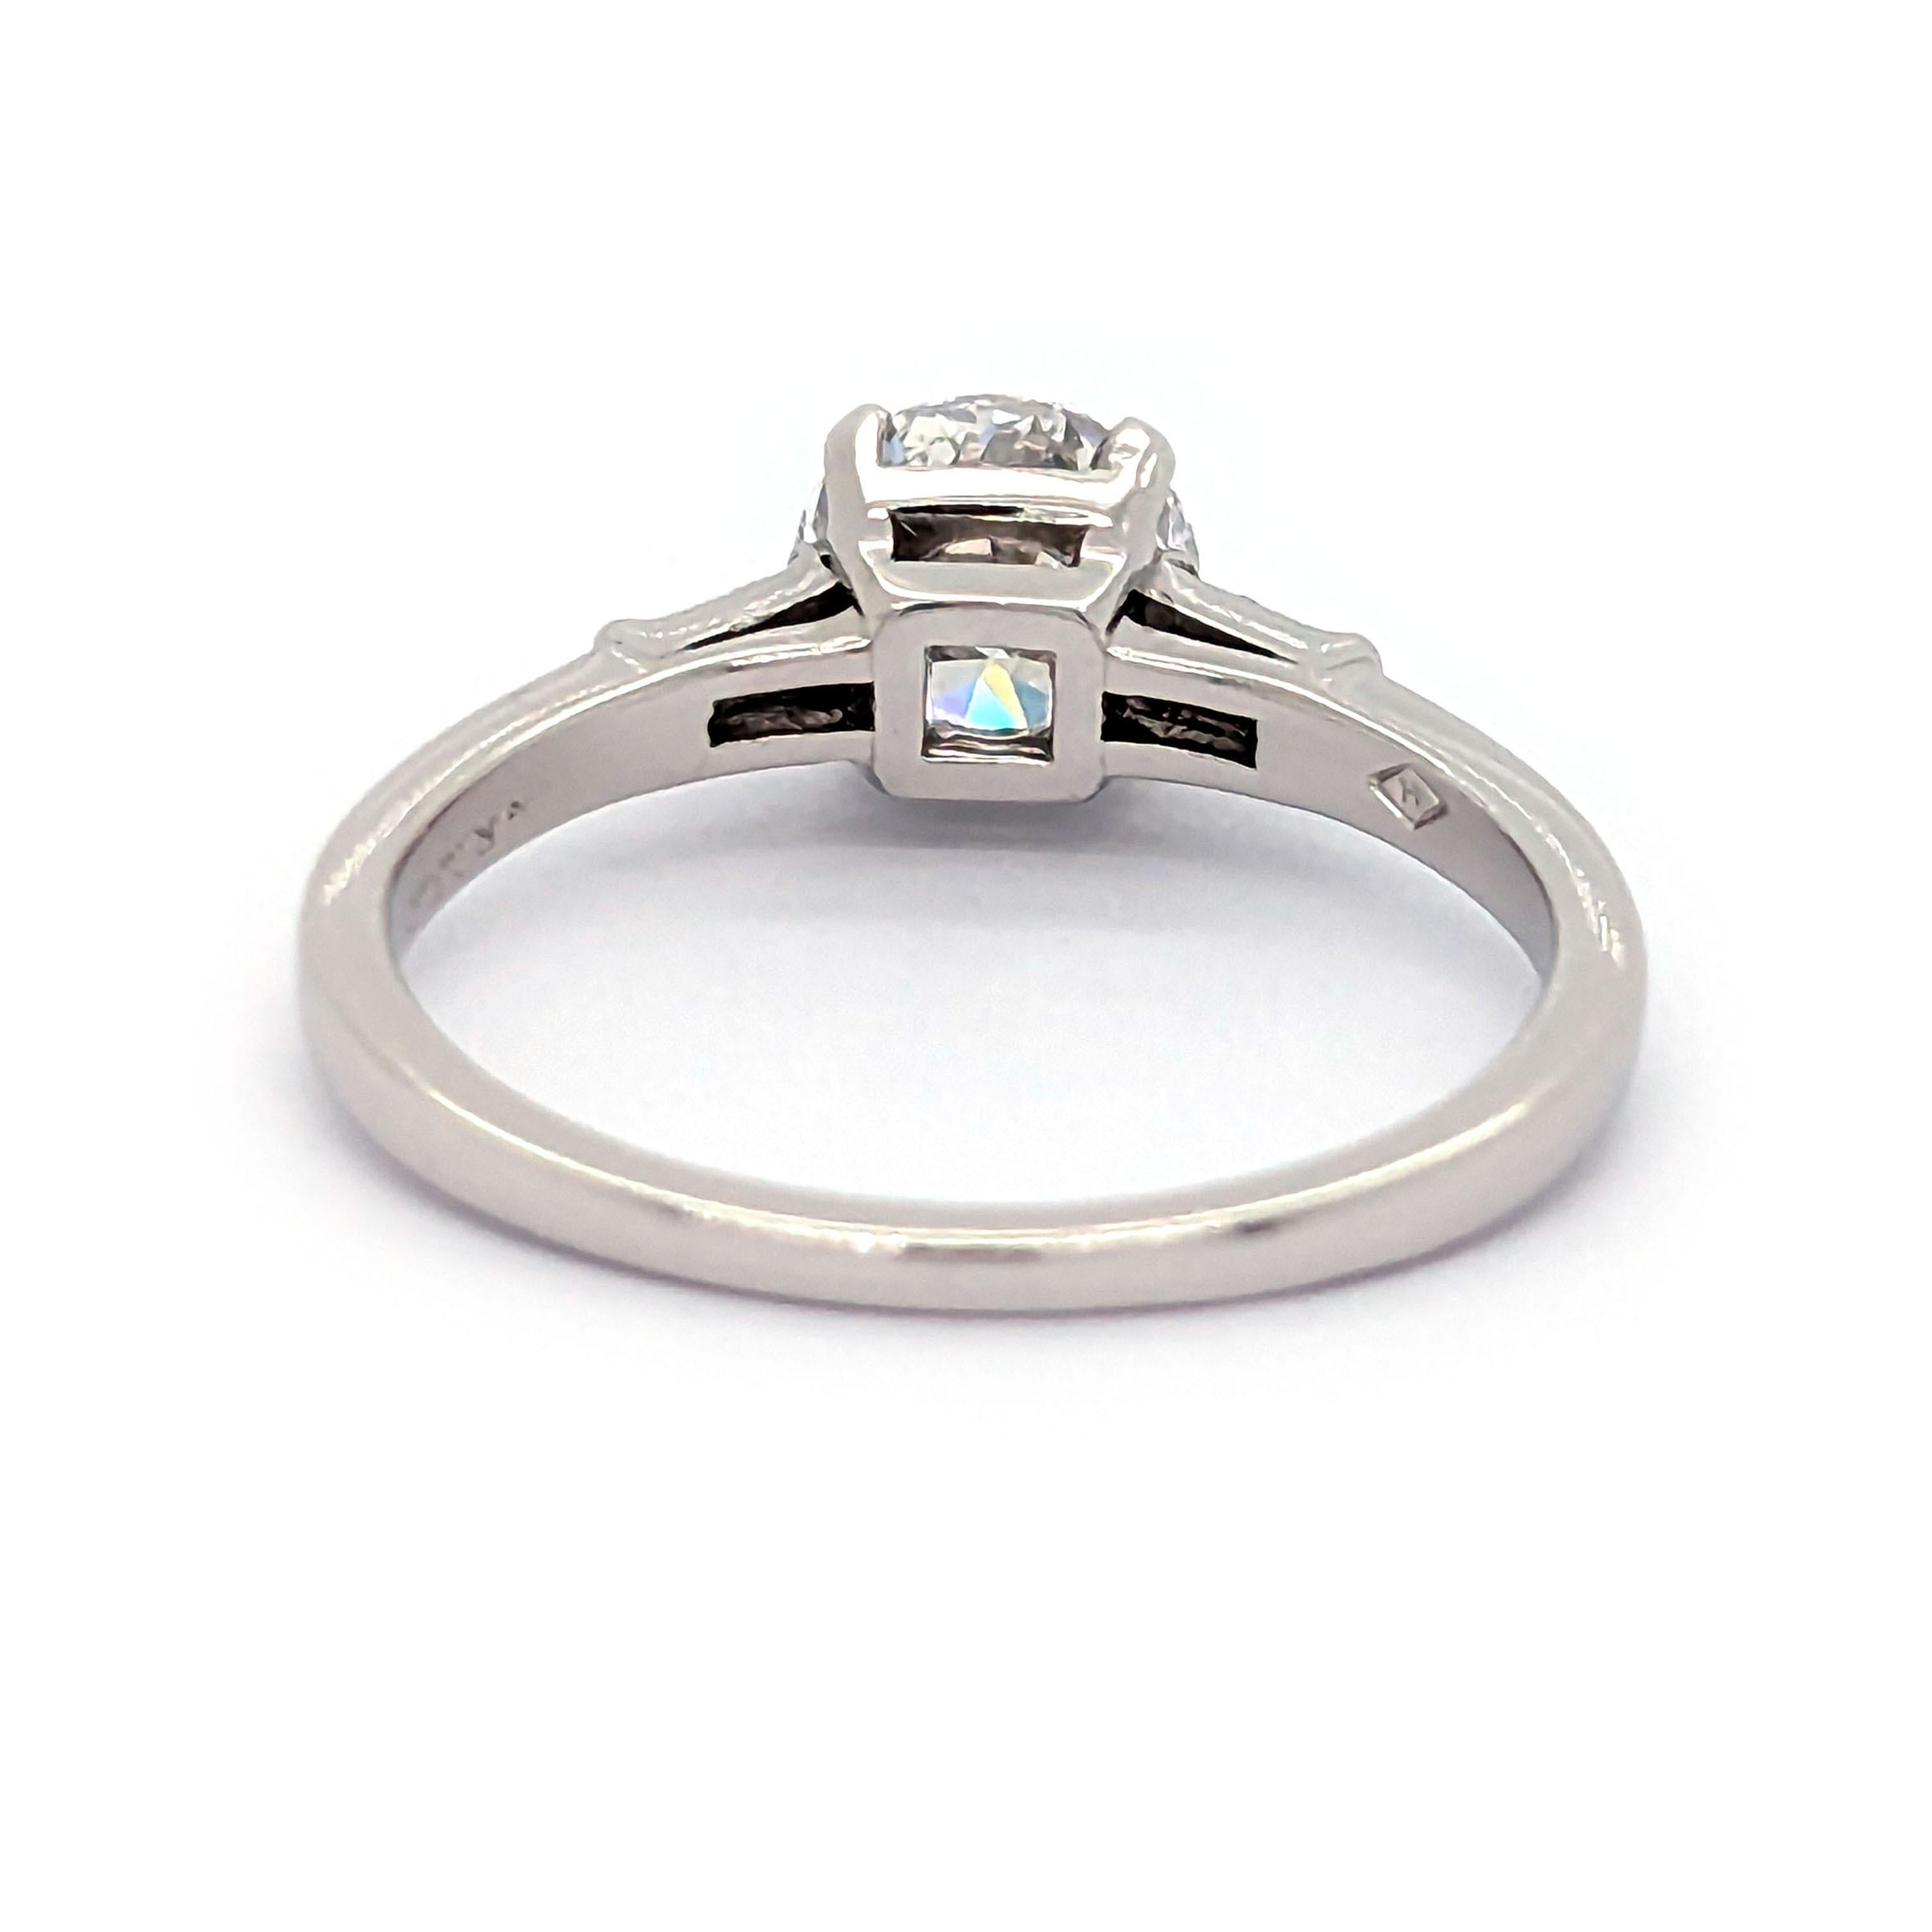 Vintage Solitaire Diamond and Platinum Ring, 0.81 Carats, Circa 1940 For Sale 3